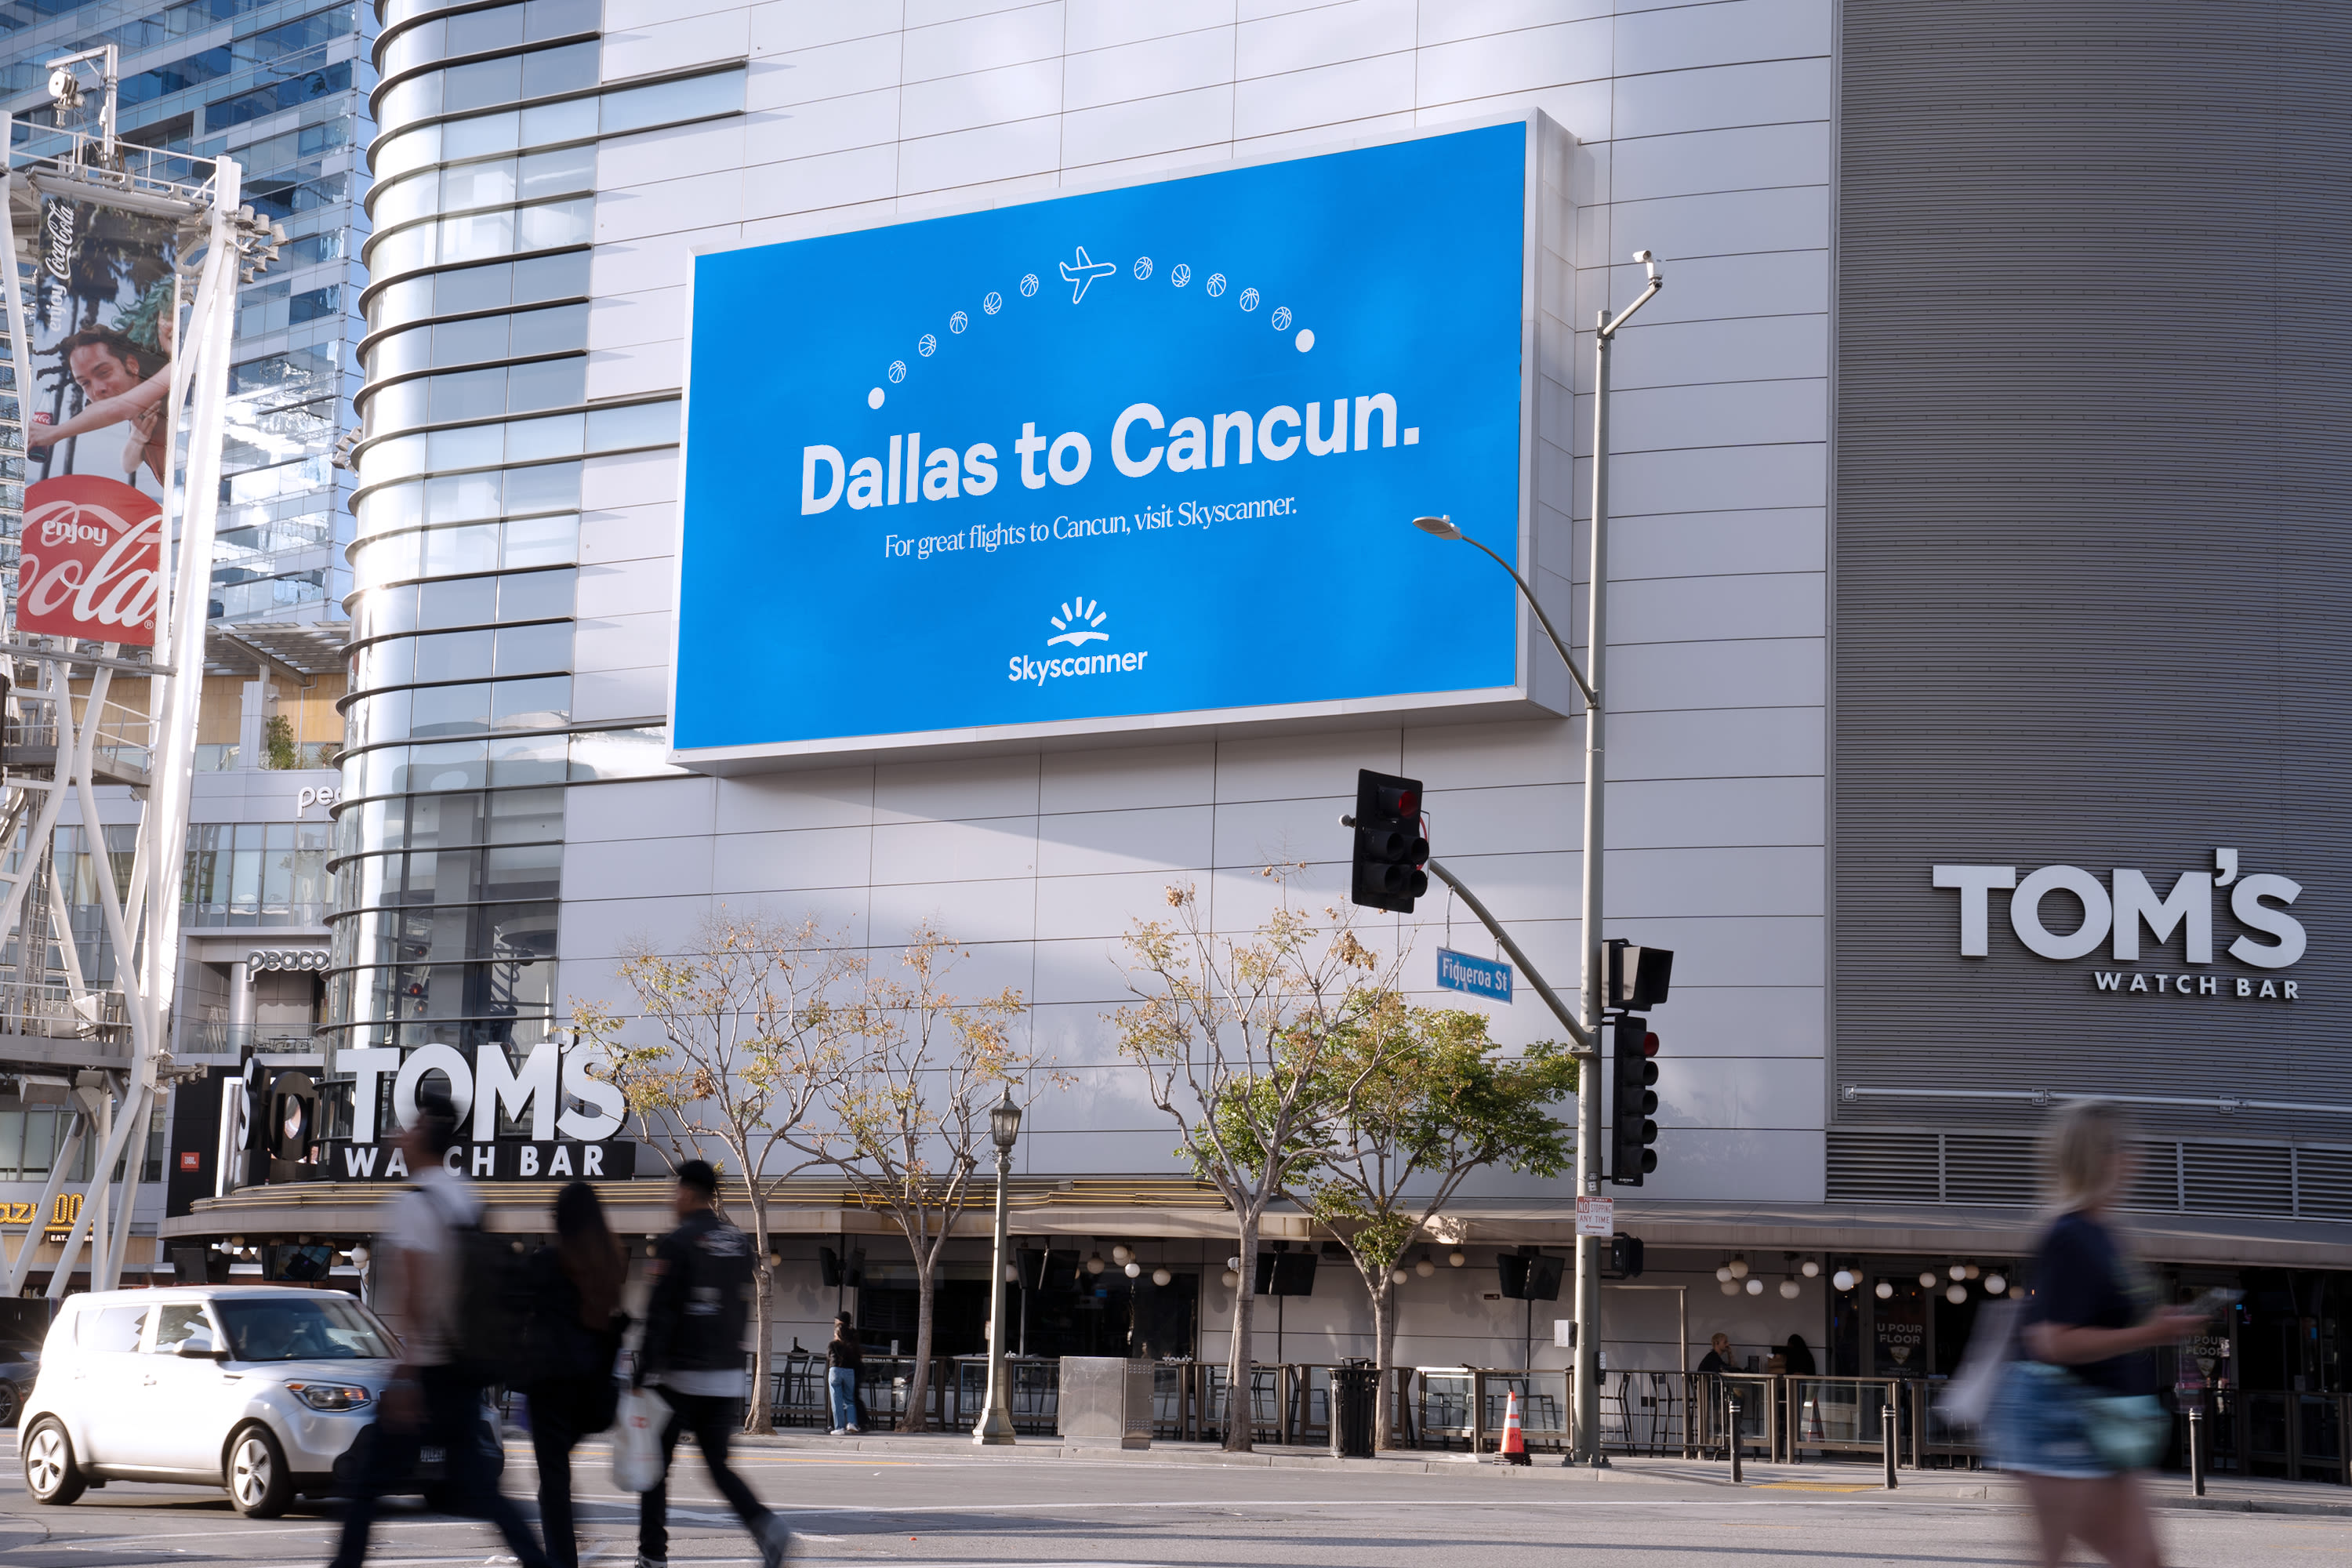 Is Clippers' series over? 'Dallas to Cancun' ad near Crypto.com Arena trolls Mavericks